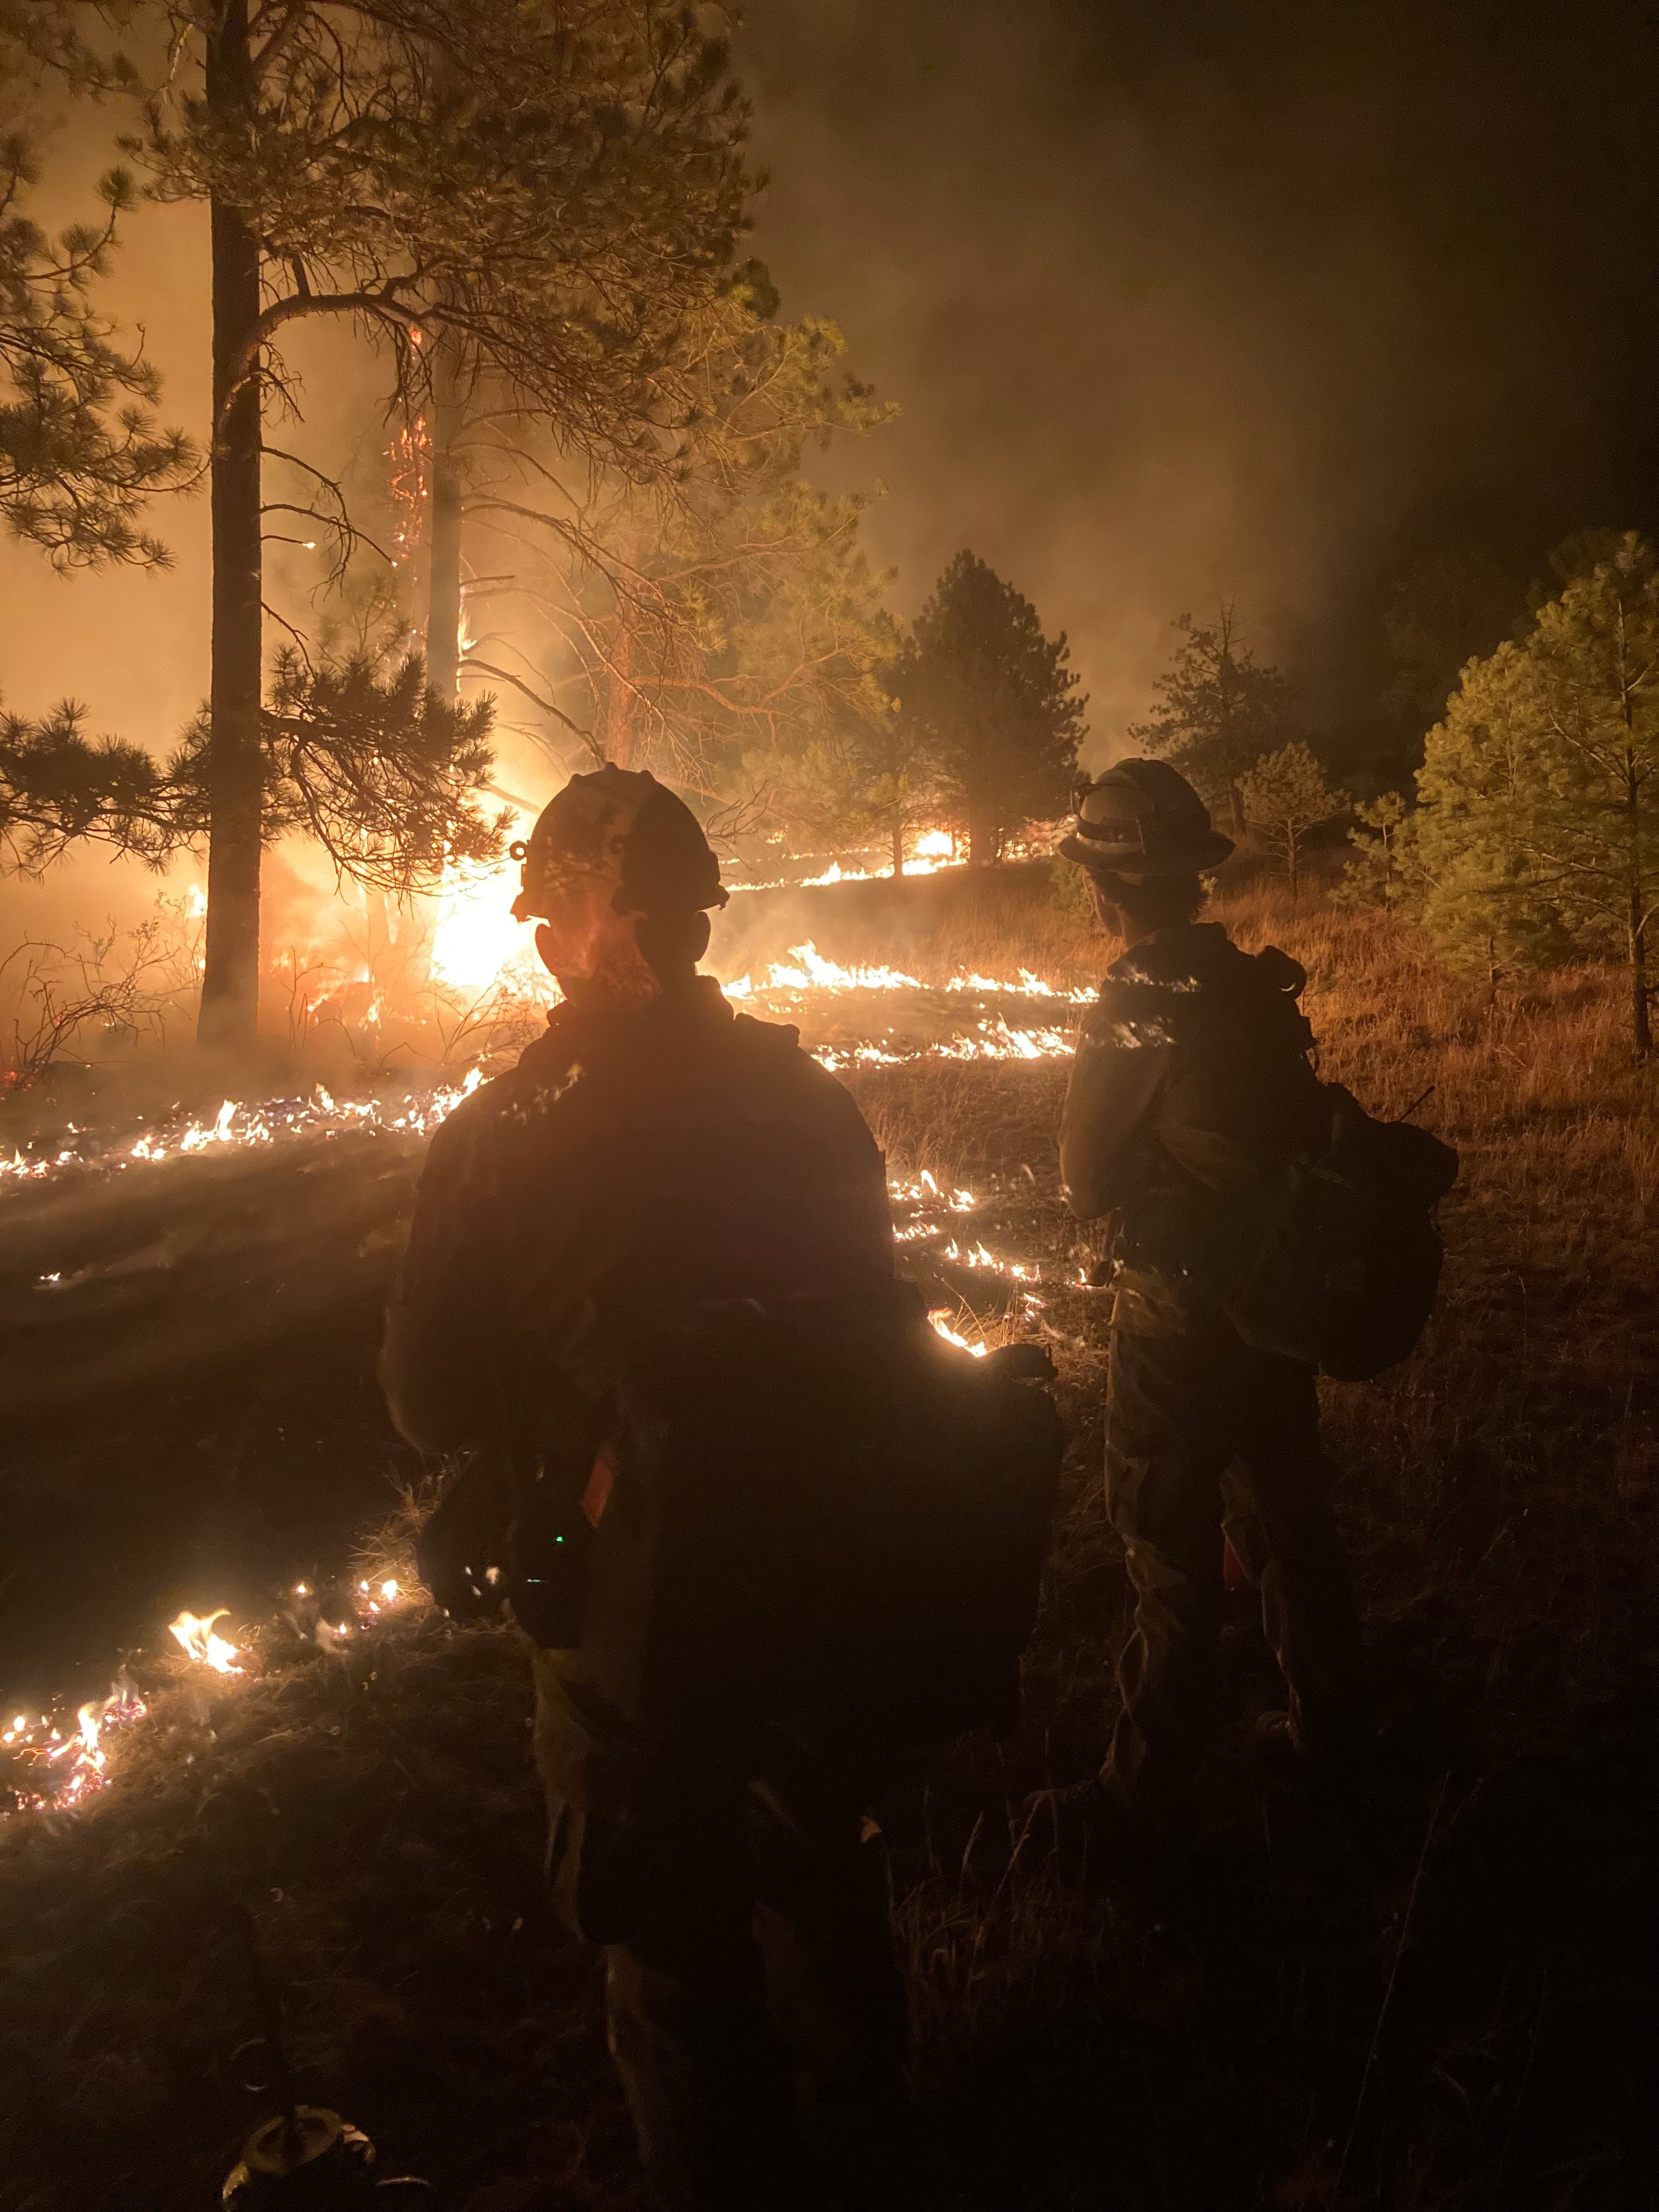 The photo shows a nighttime view of two firefighters stand with their backs to the camera. Flames show that wind is coming from the right. Flames creep in the grass and lick up the trunks of trees. Smoke increases in density toward frame left.